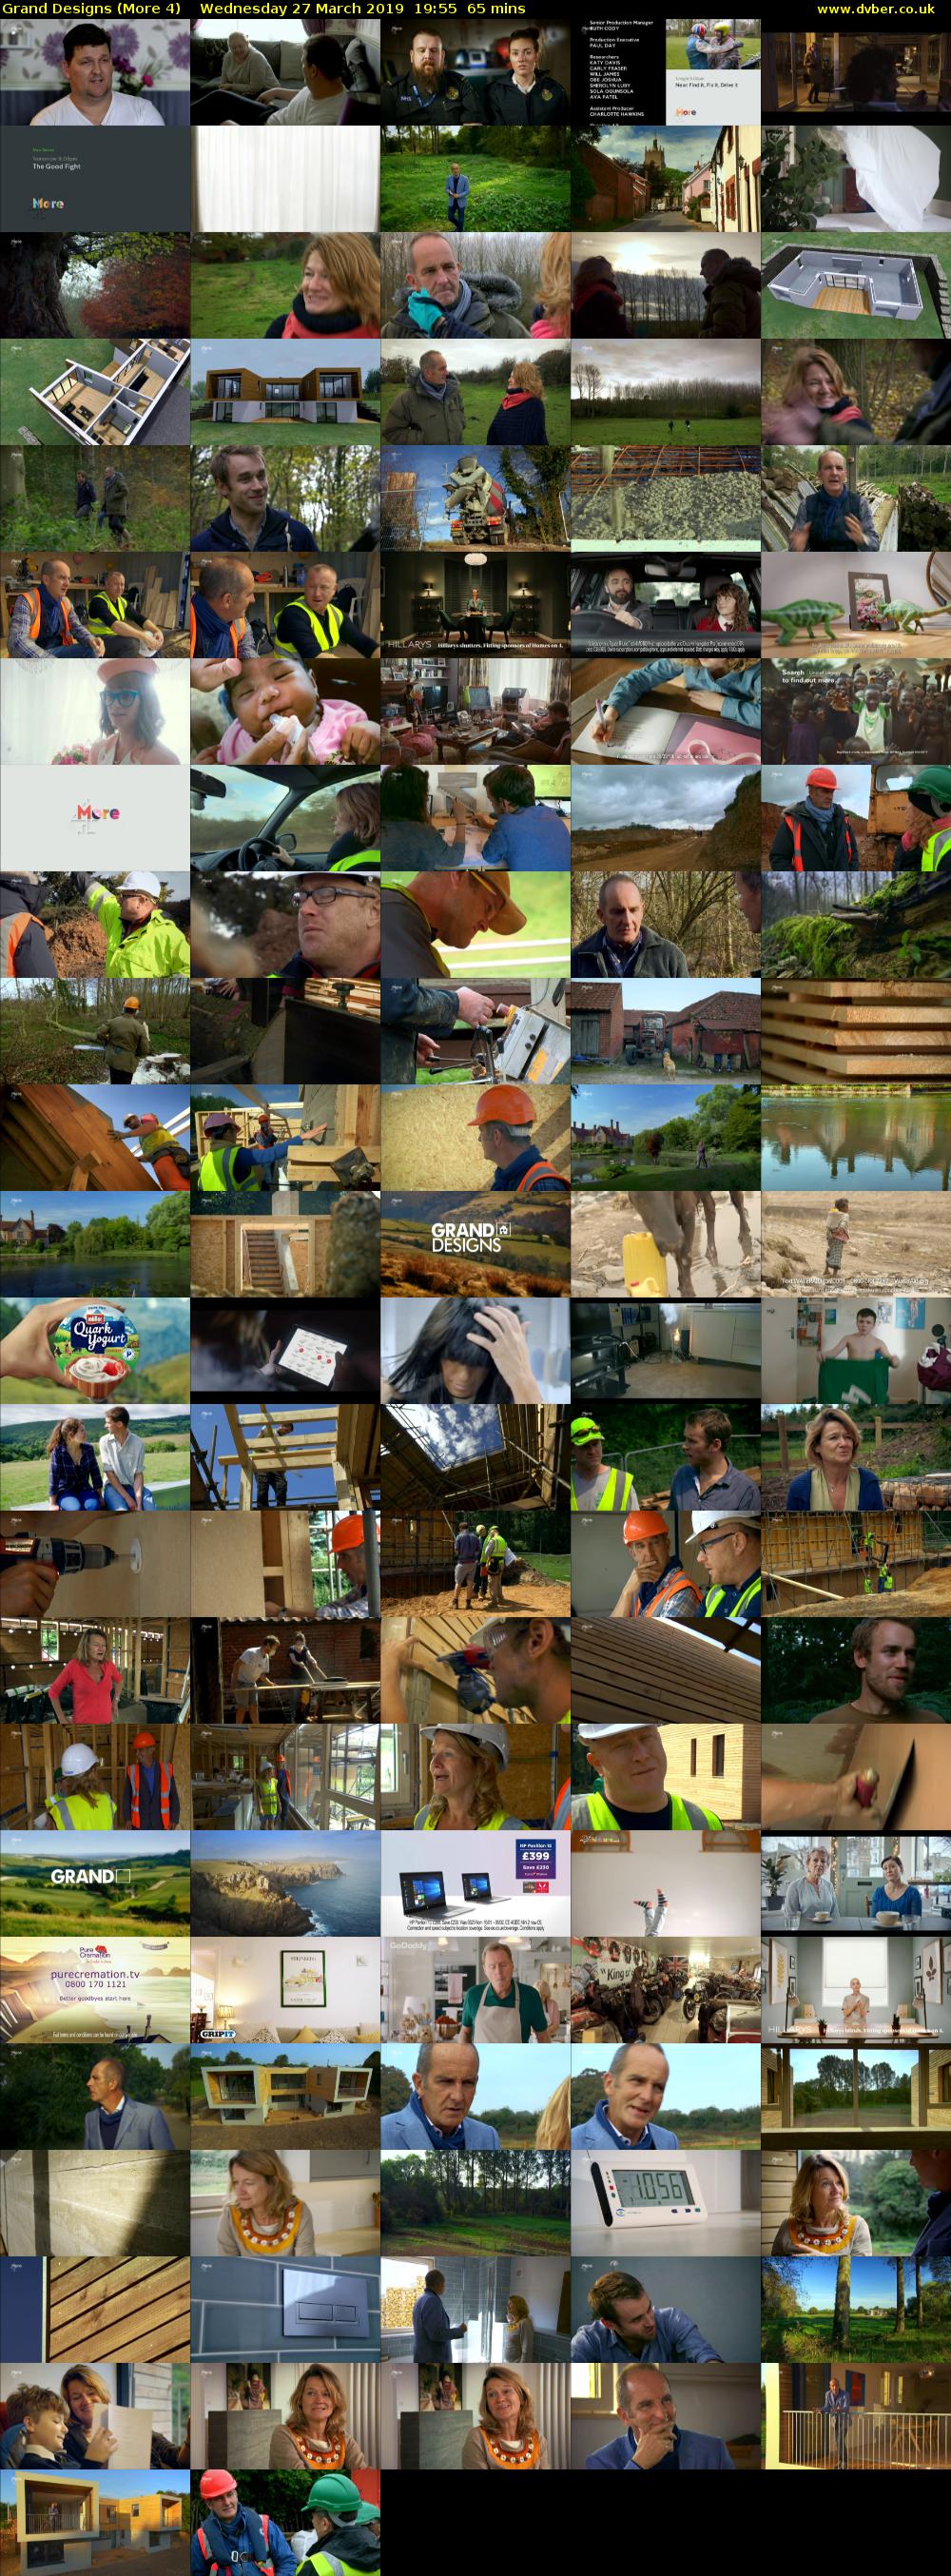 Grand Designs (More 4) Wednesday 27 March 2019 19:55 - 21:00